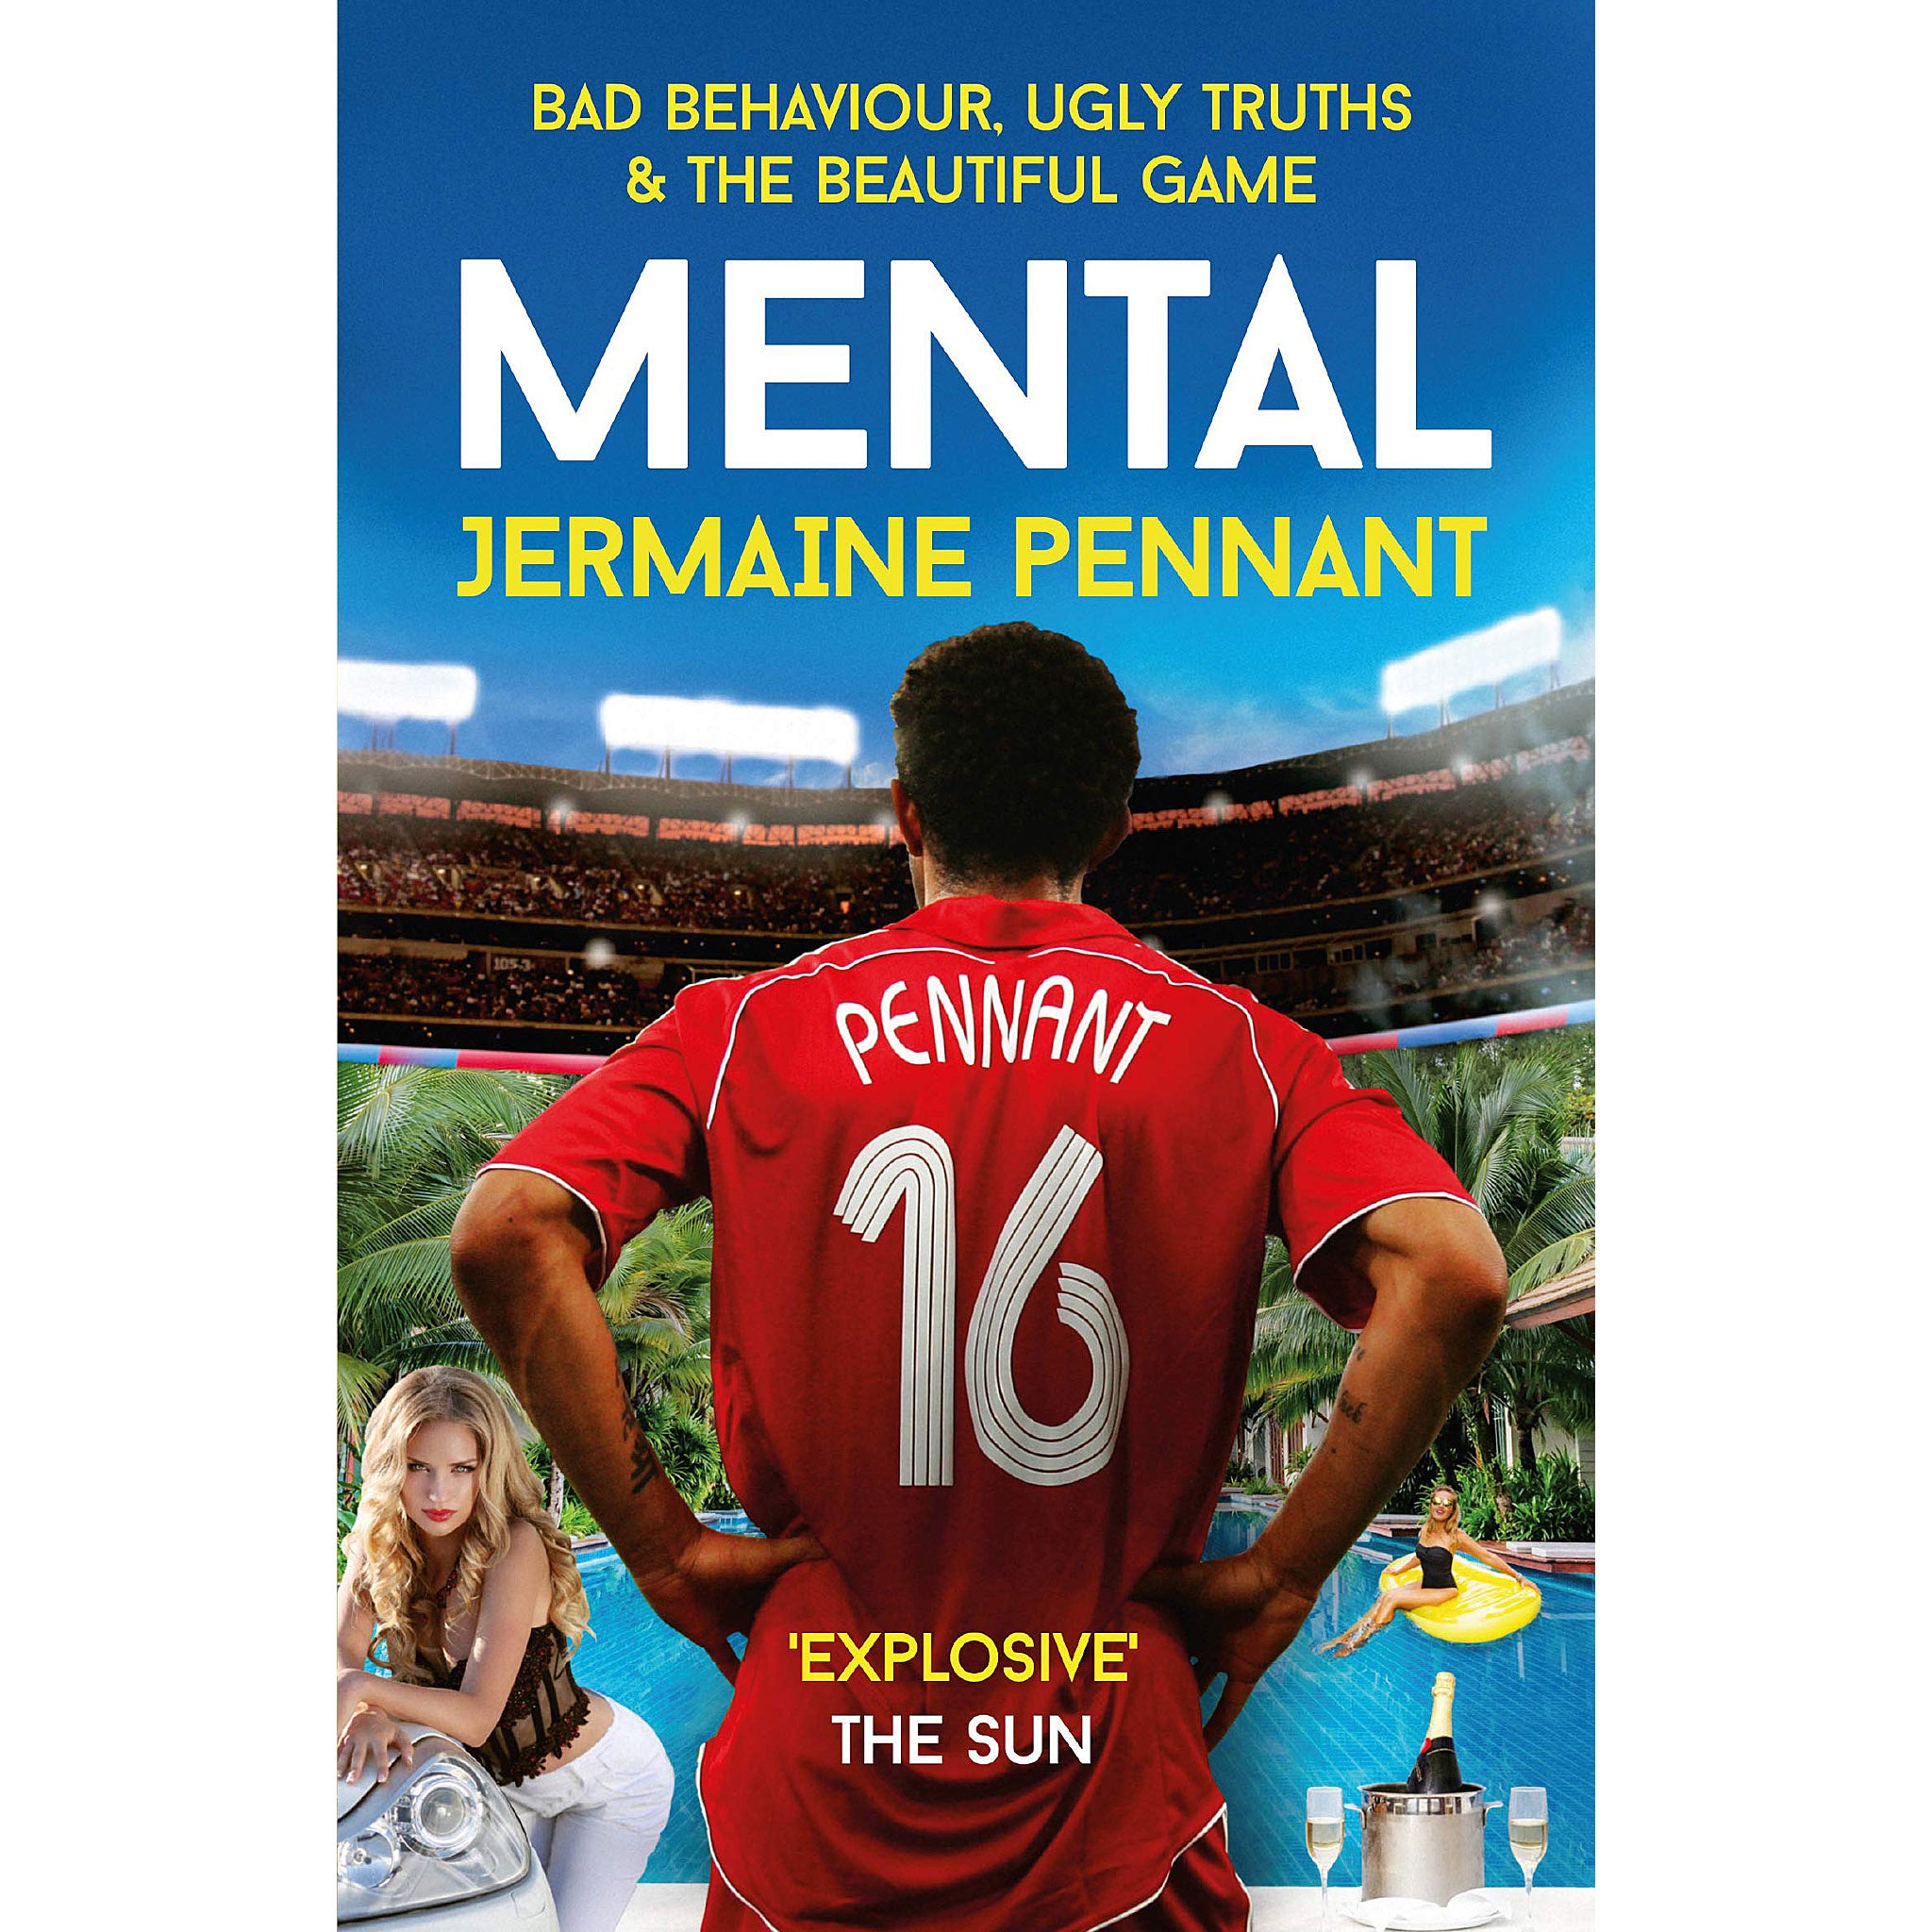 Mental – Jermaine Pennant – Bad Behaviour, Ugly Truths & The Beautiful Game – Softback